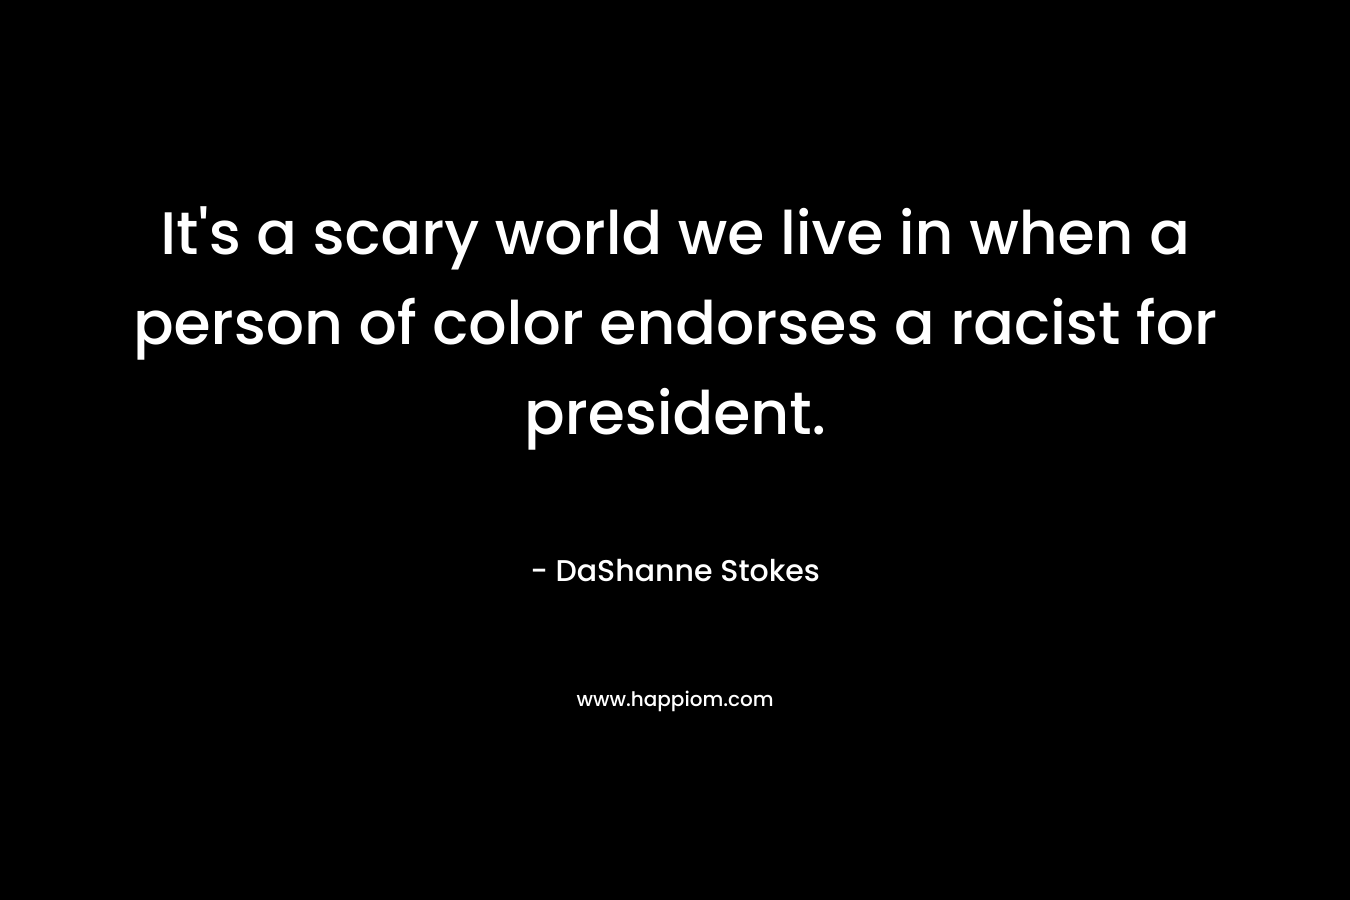 It's a scary world we live in when a person of color endorses a racist for president.